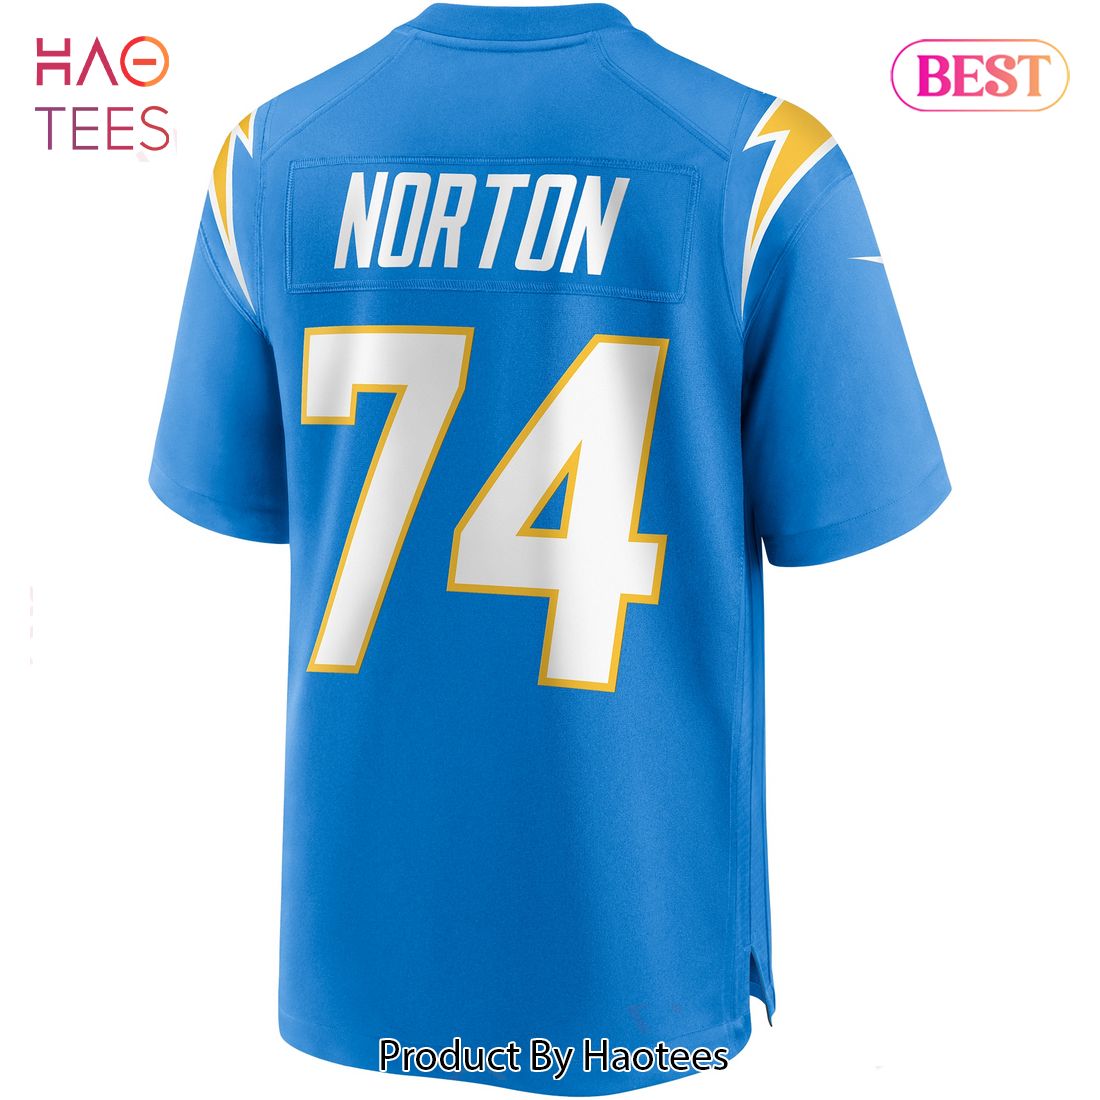 Storm Norton Los Angeles Chargers Nike Team Game Jersey Powder Blue